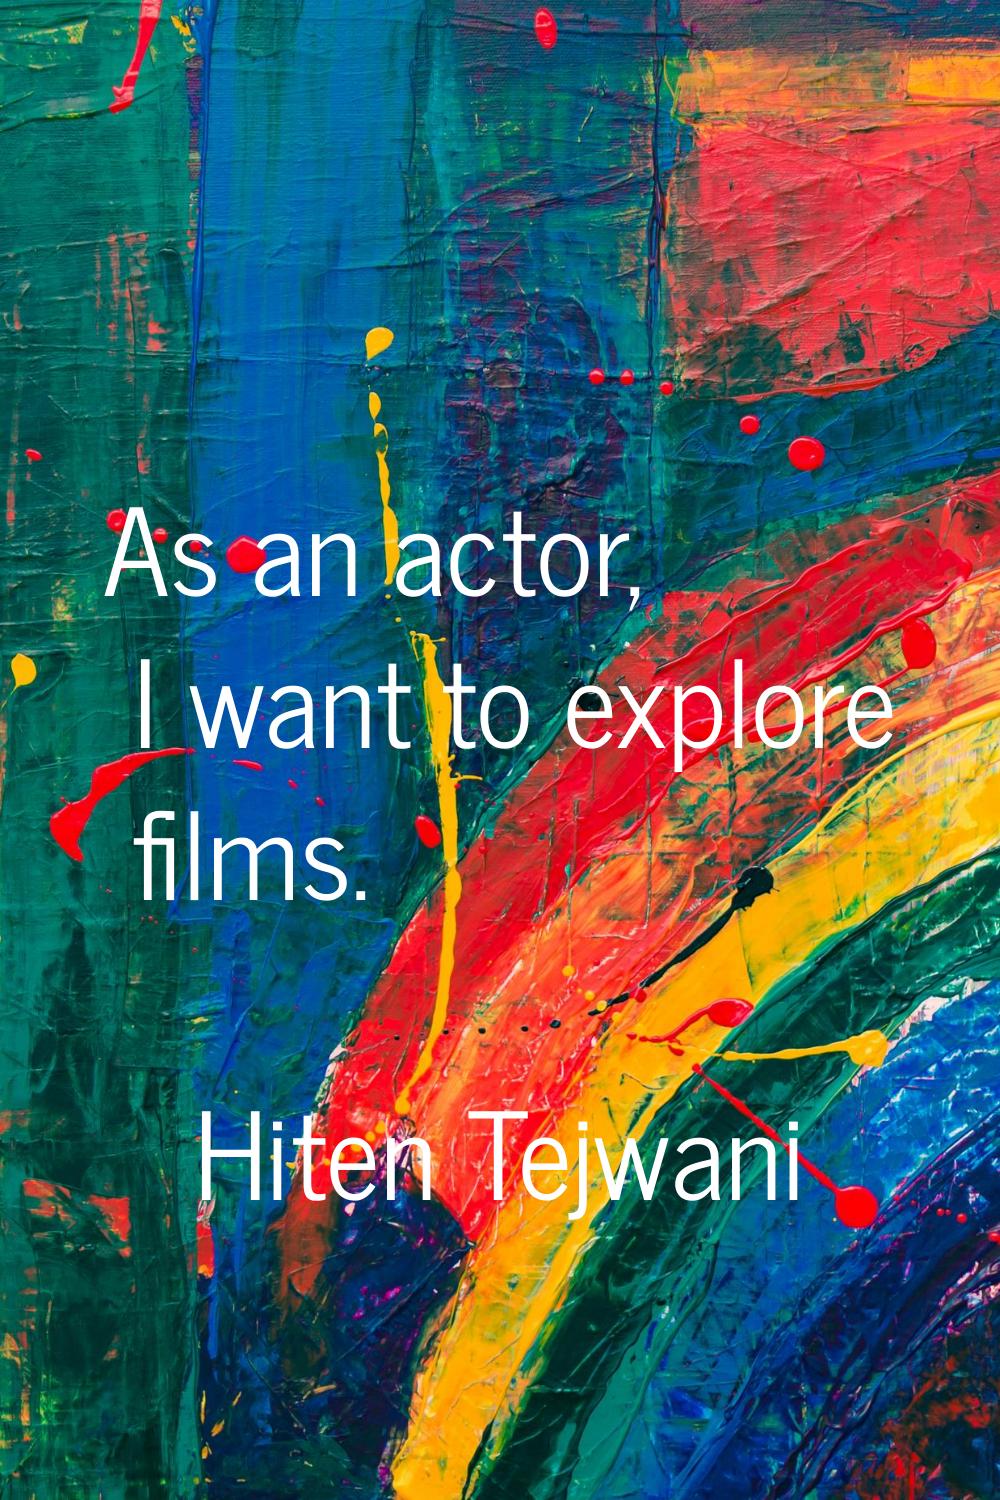 As an actor, I want to explore films.